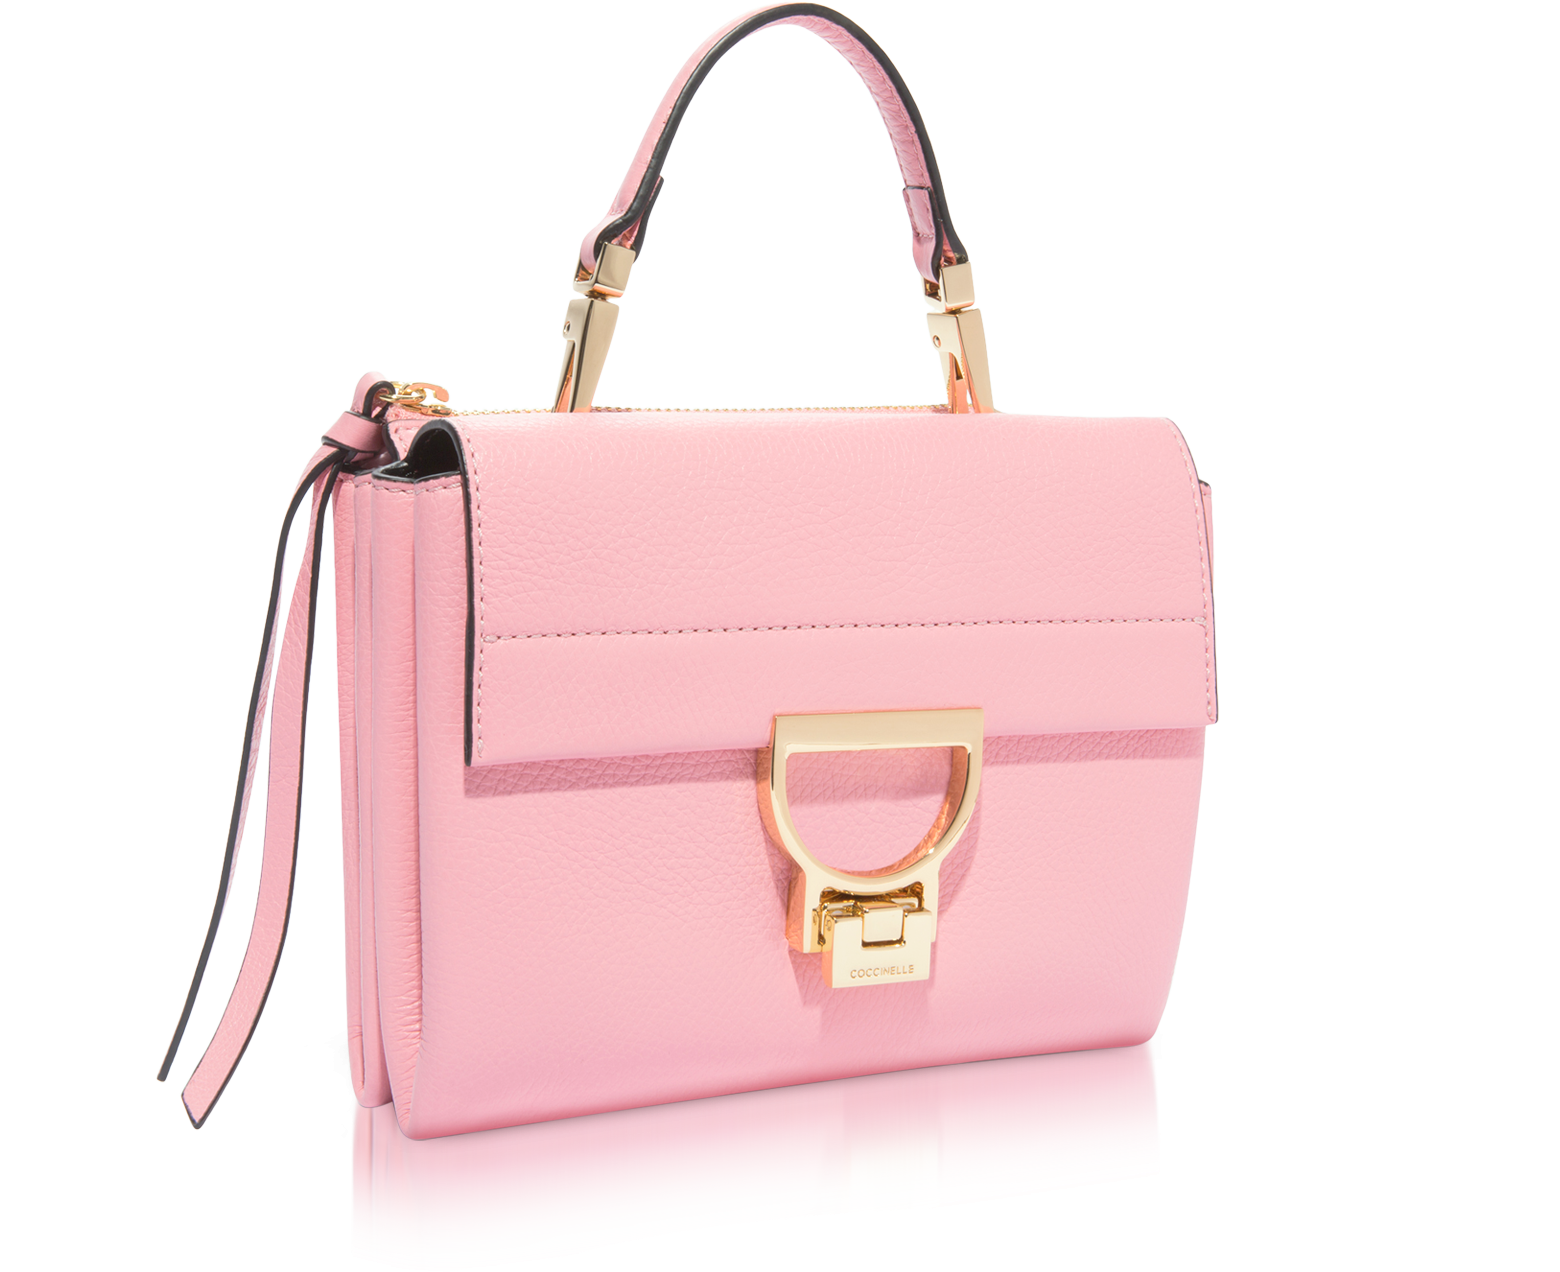 Coccinelle Pink Arlettis Mini Leather Bag with Shoulder Strap at FORZIERI